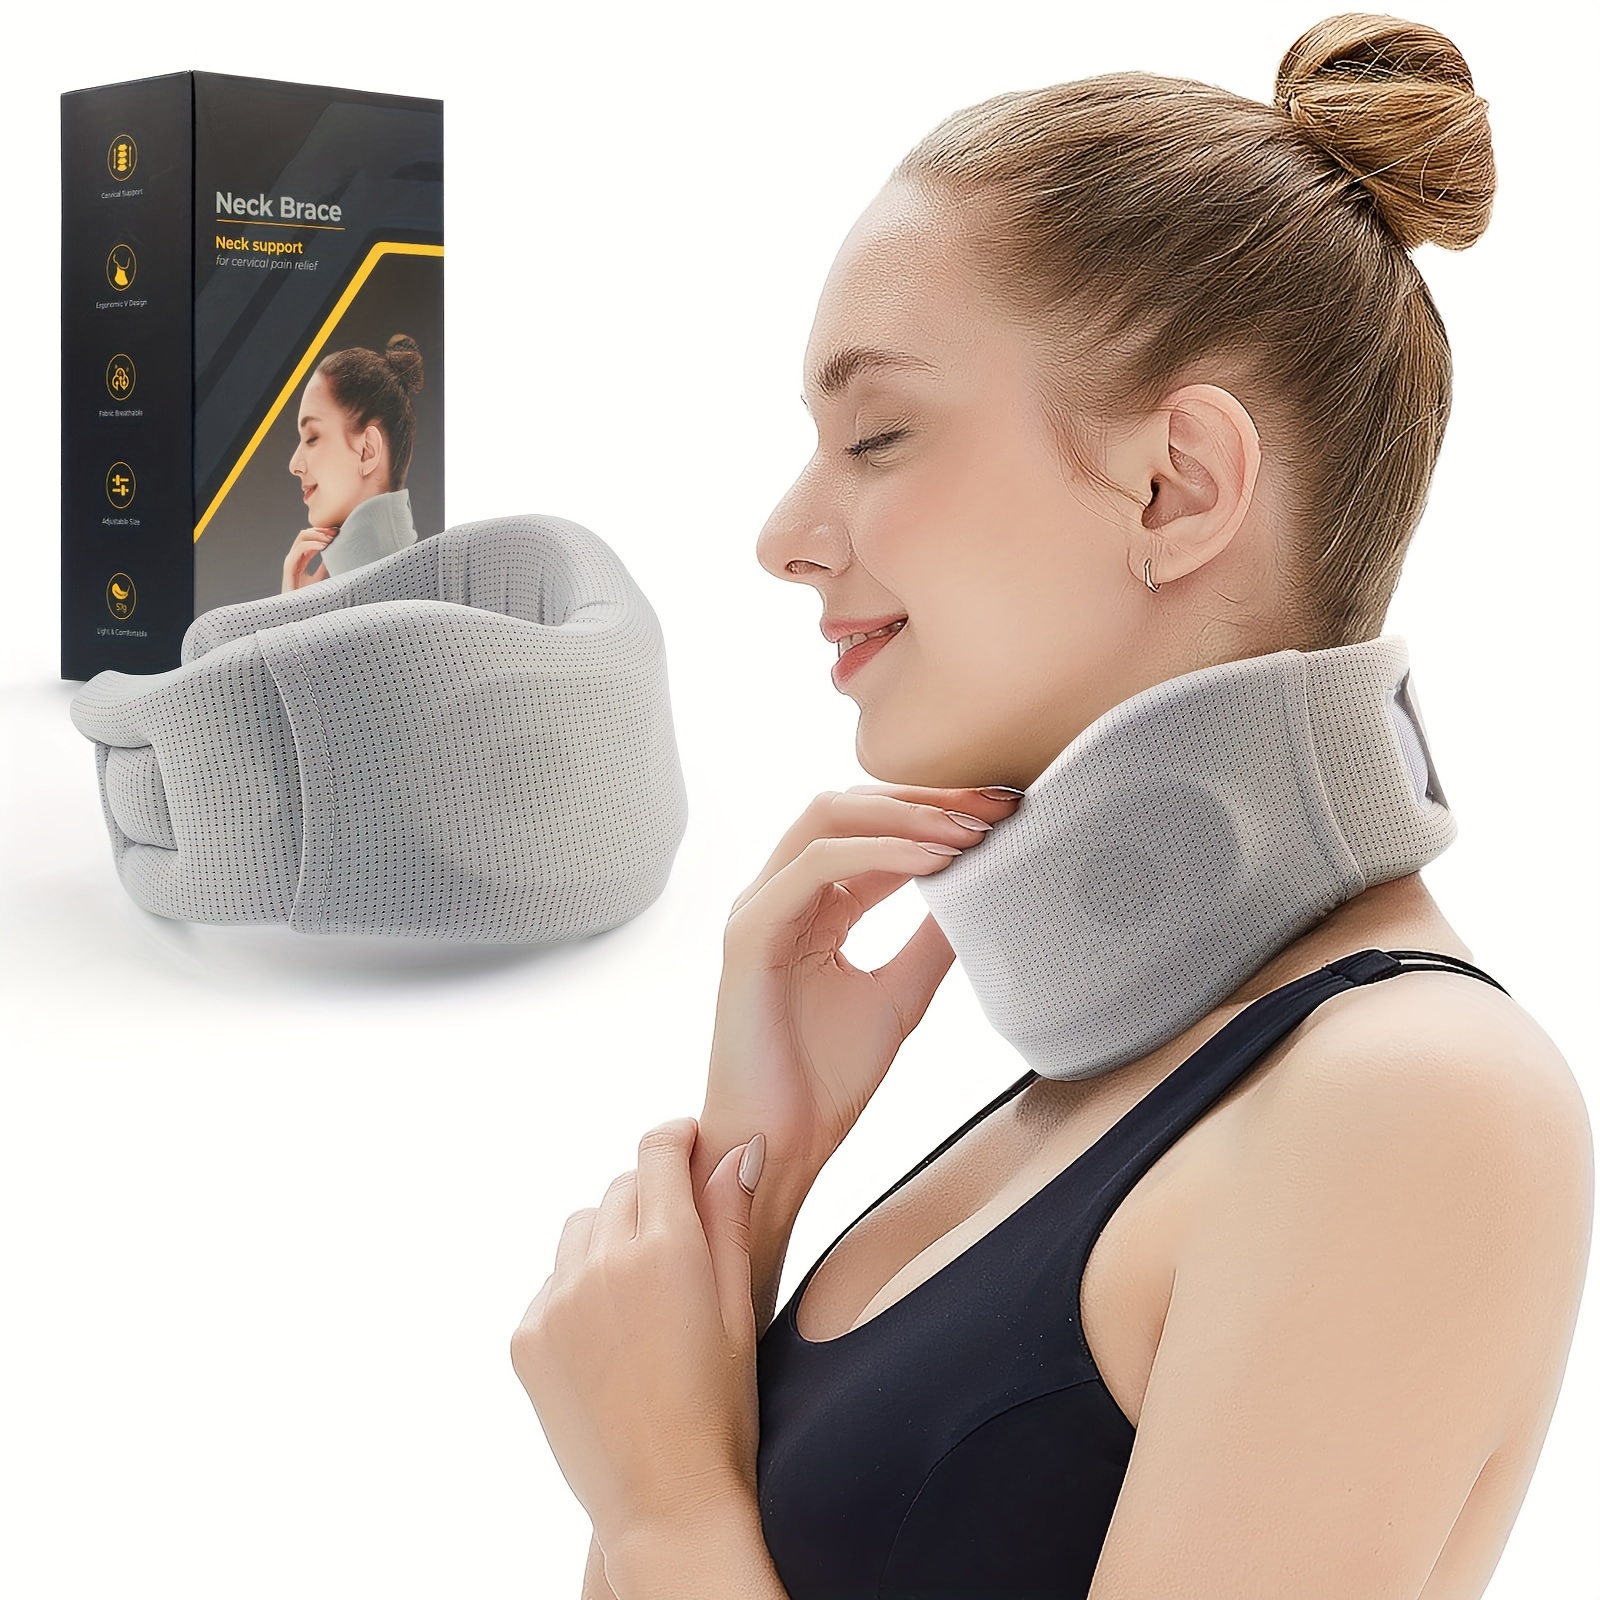  Soft Foam Neck Brace Universal Cervical Collar, Adjustable Neck  Support Brace for Sleeping - Relieves Neck Pain and Spine Pressure, Neck  Collar After Whiplash or Injury (3 Depth Collar, M) 